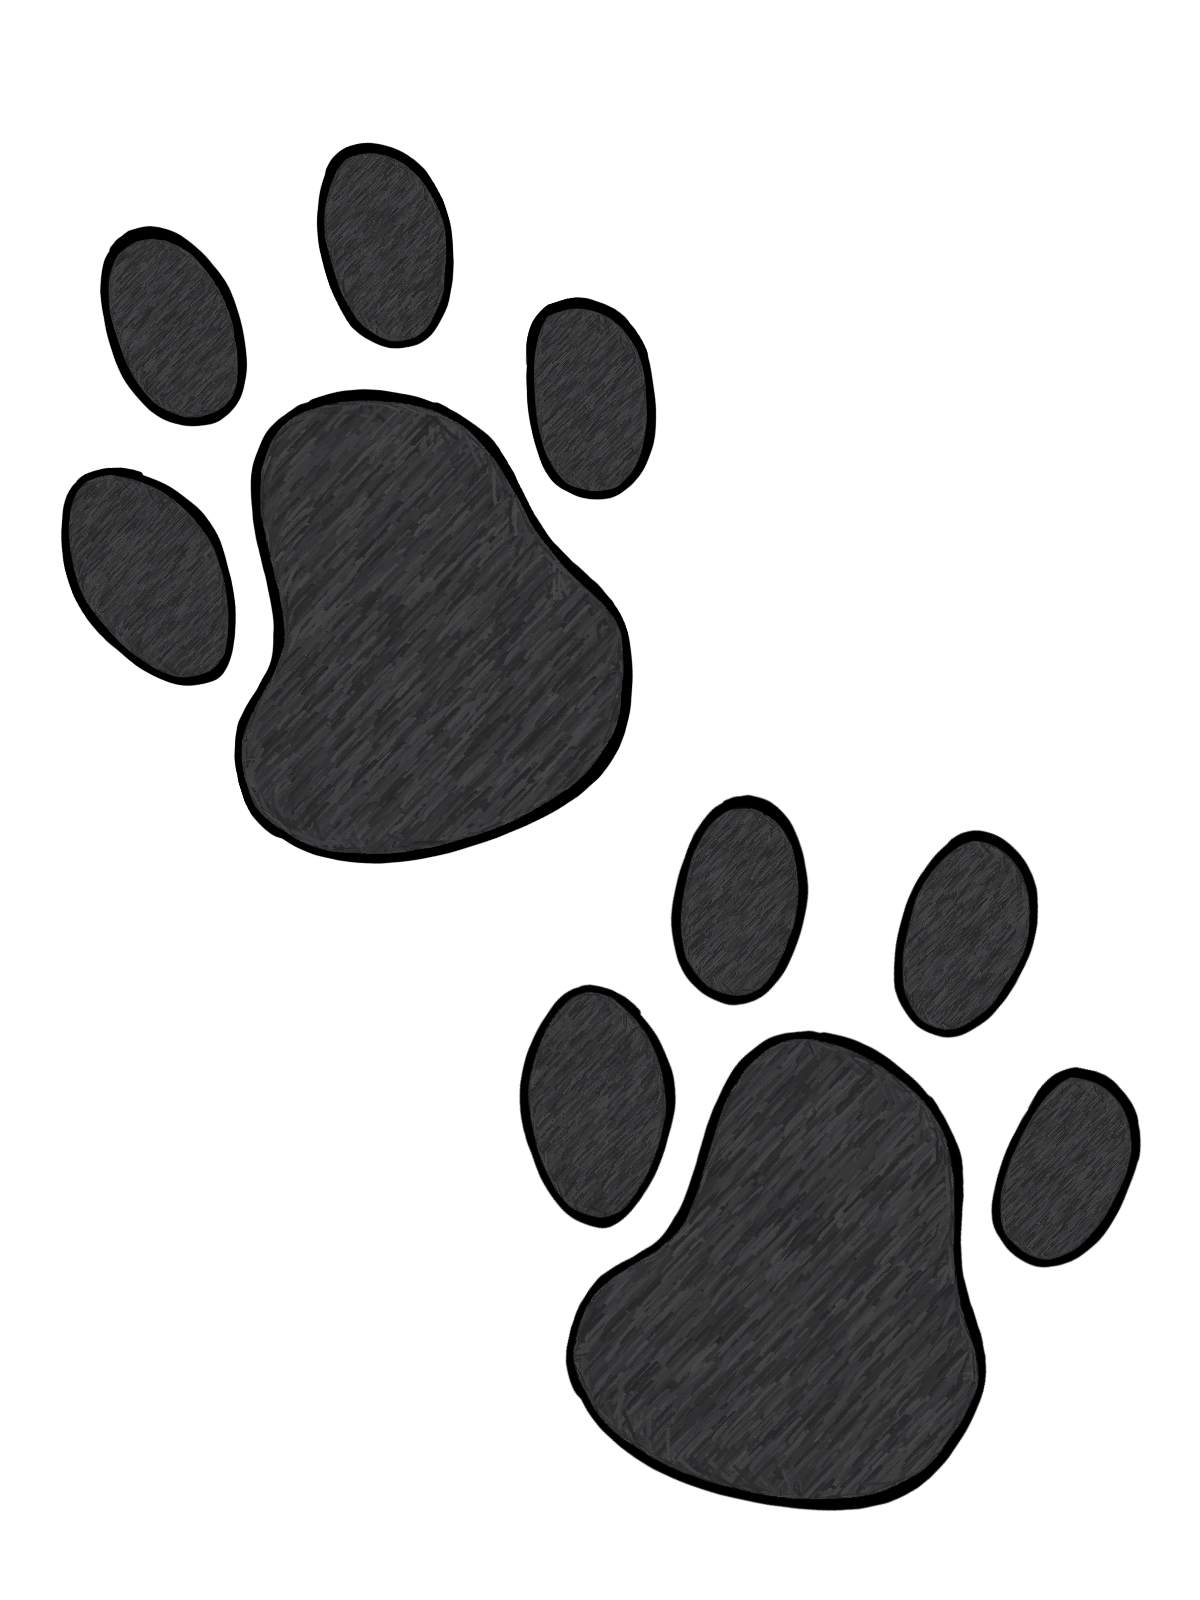 Paw Print Images Png Image Clipart